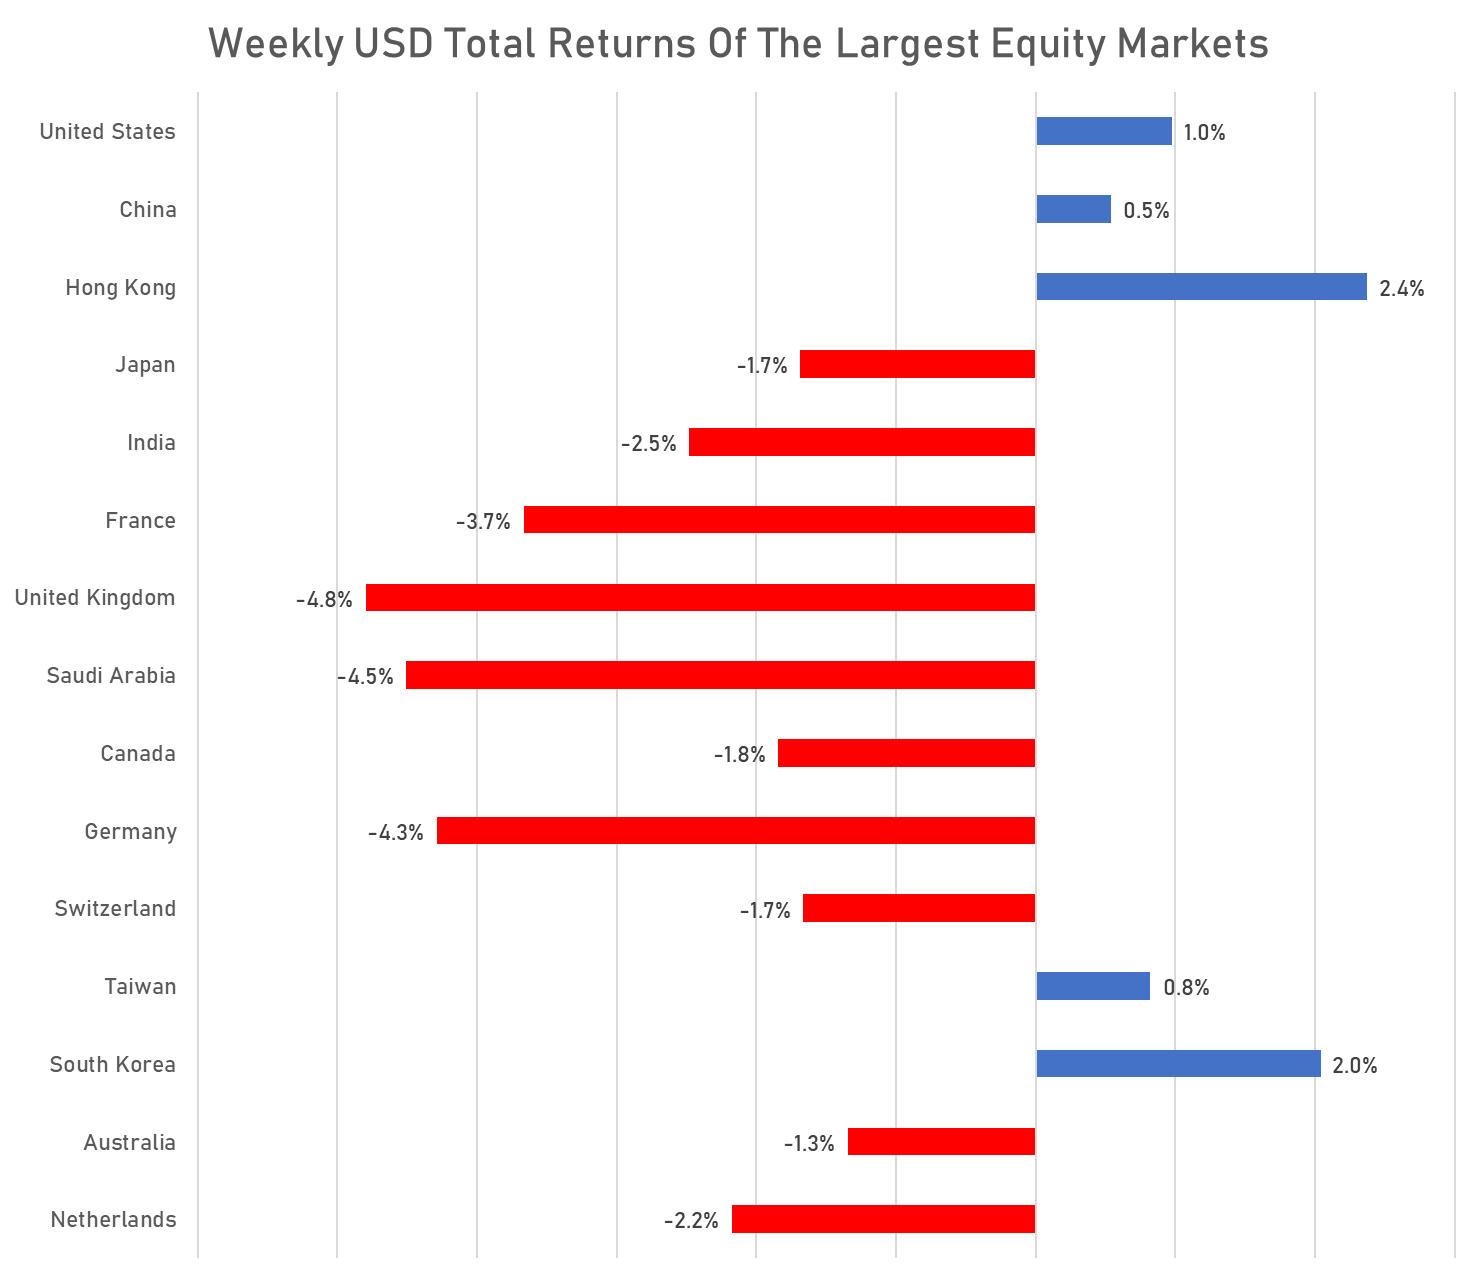 Weekly USD Total Returns of Global markets | Sources: phipost.com, FactSet data